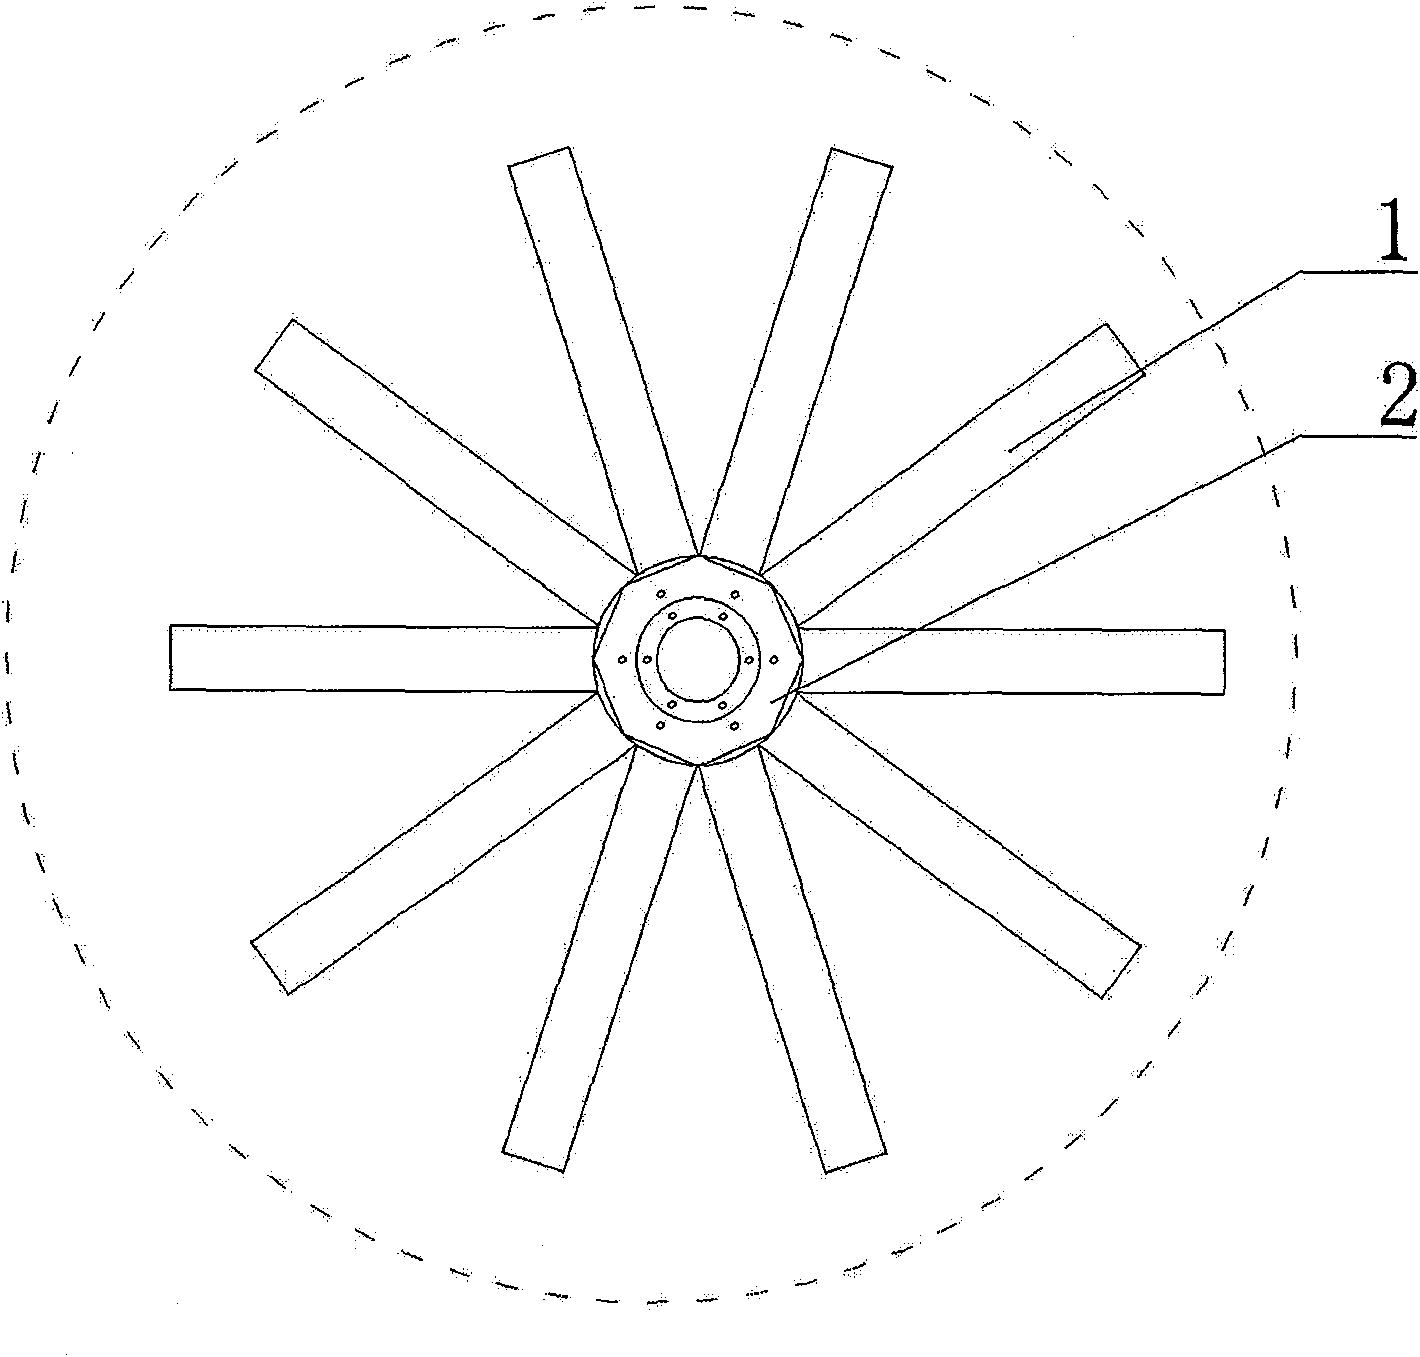 Large-size variable-frequency energy-saving fan